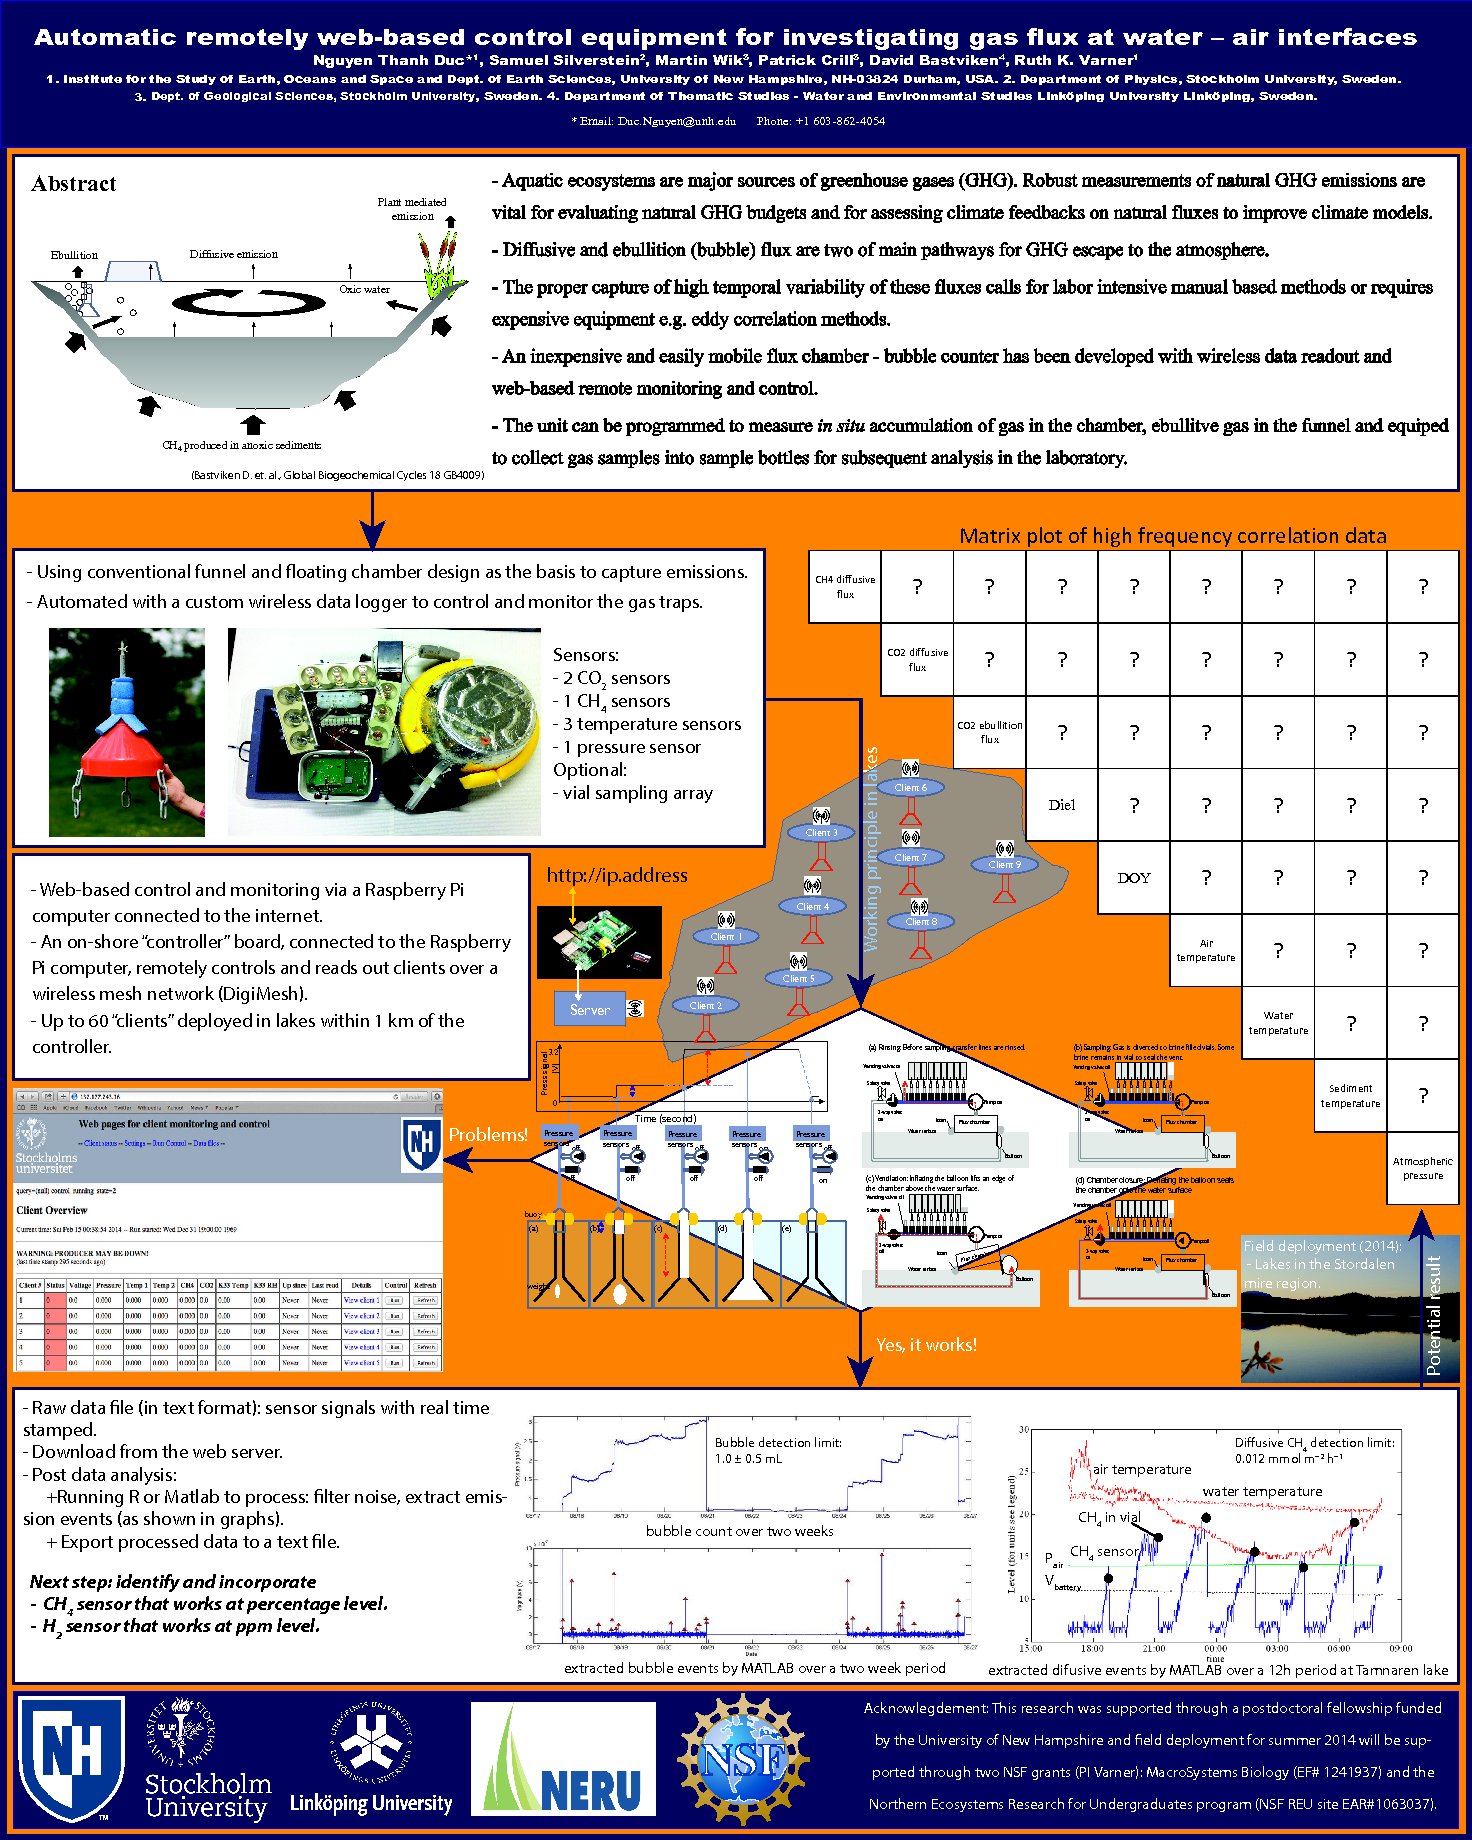 An Automatic Remotely Web-Based Control Equipment For Investigating Gas Flux At Water – Air Interfaces by rakerwin